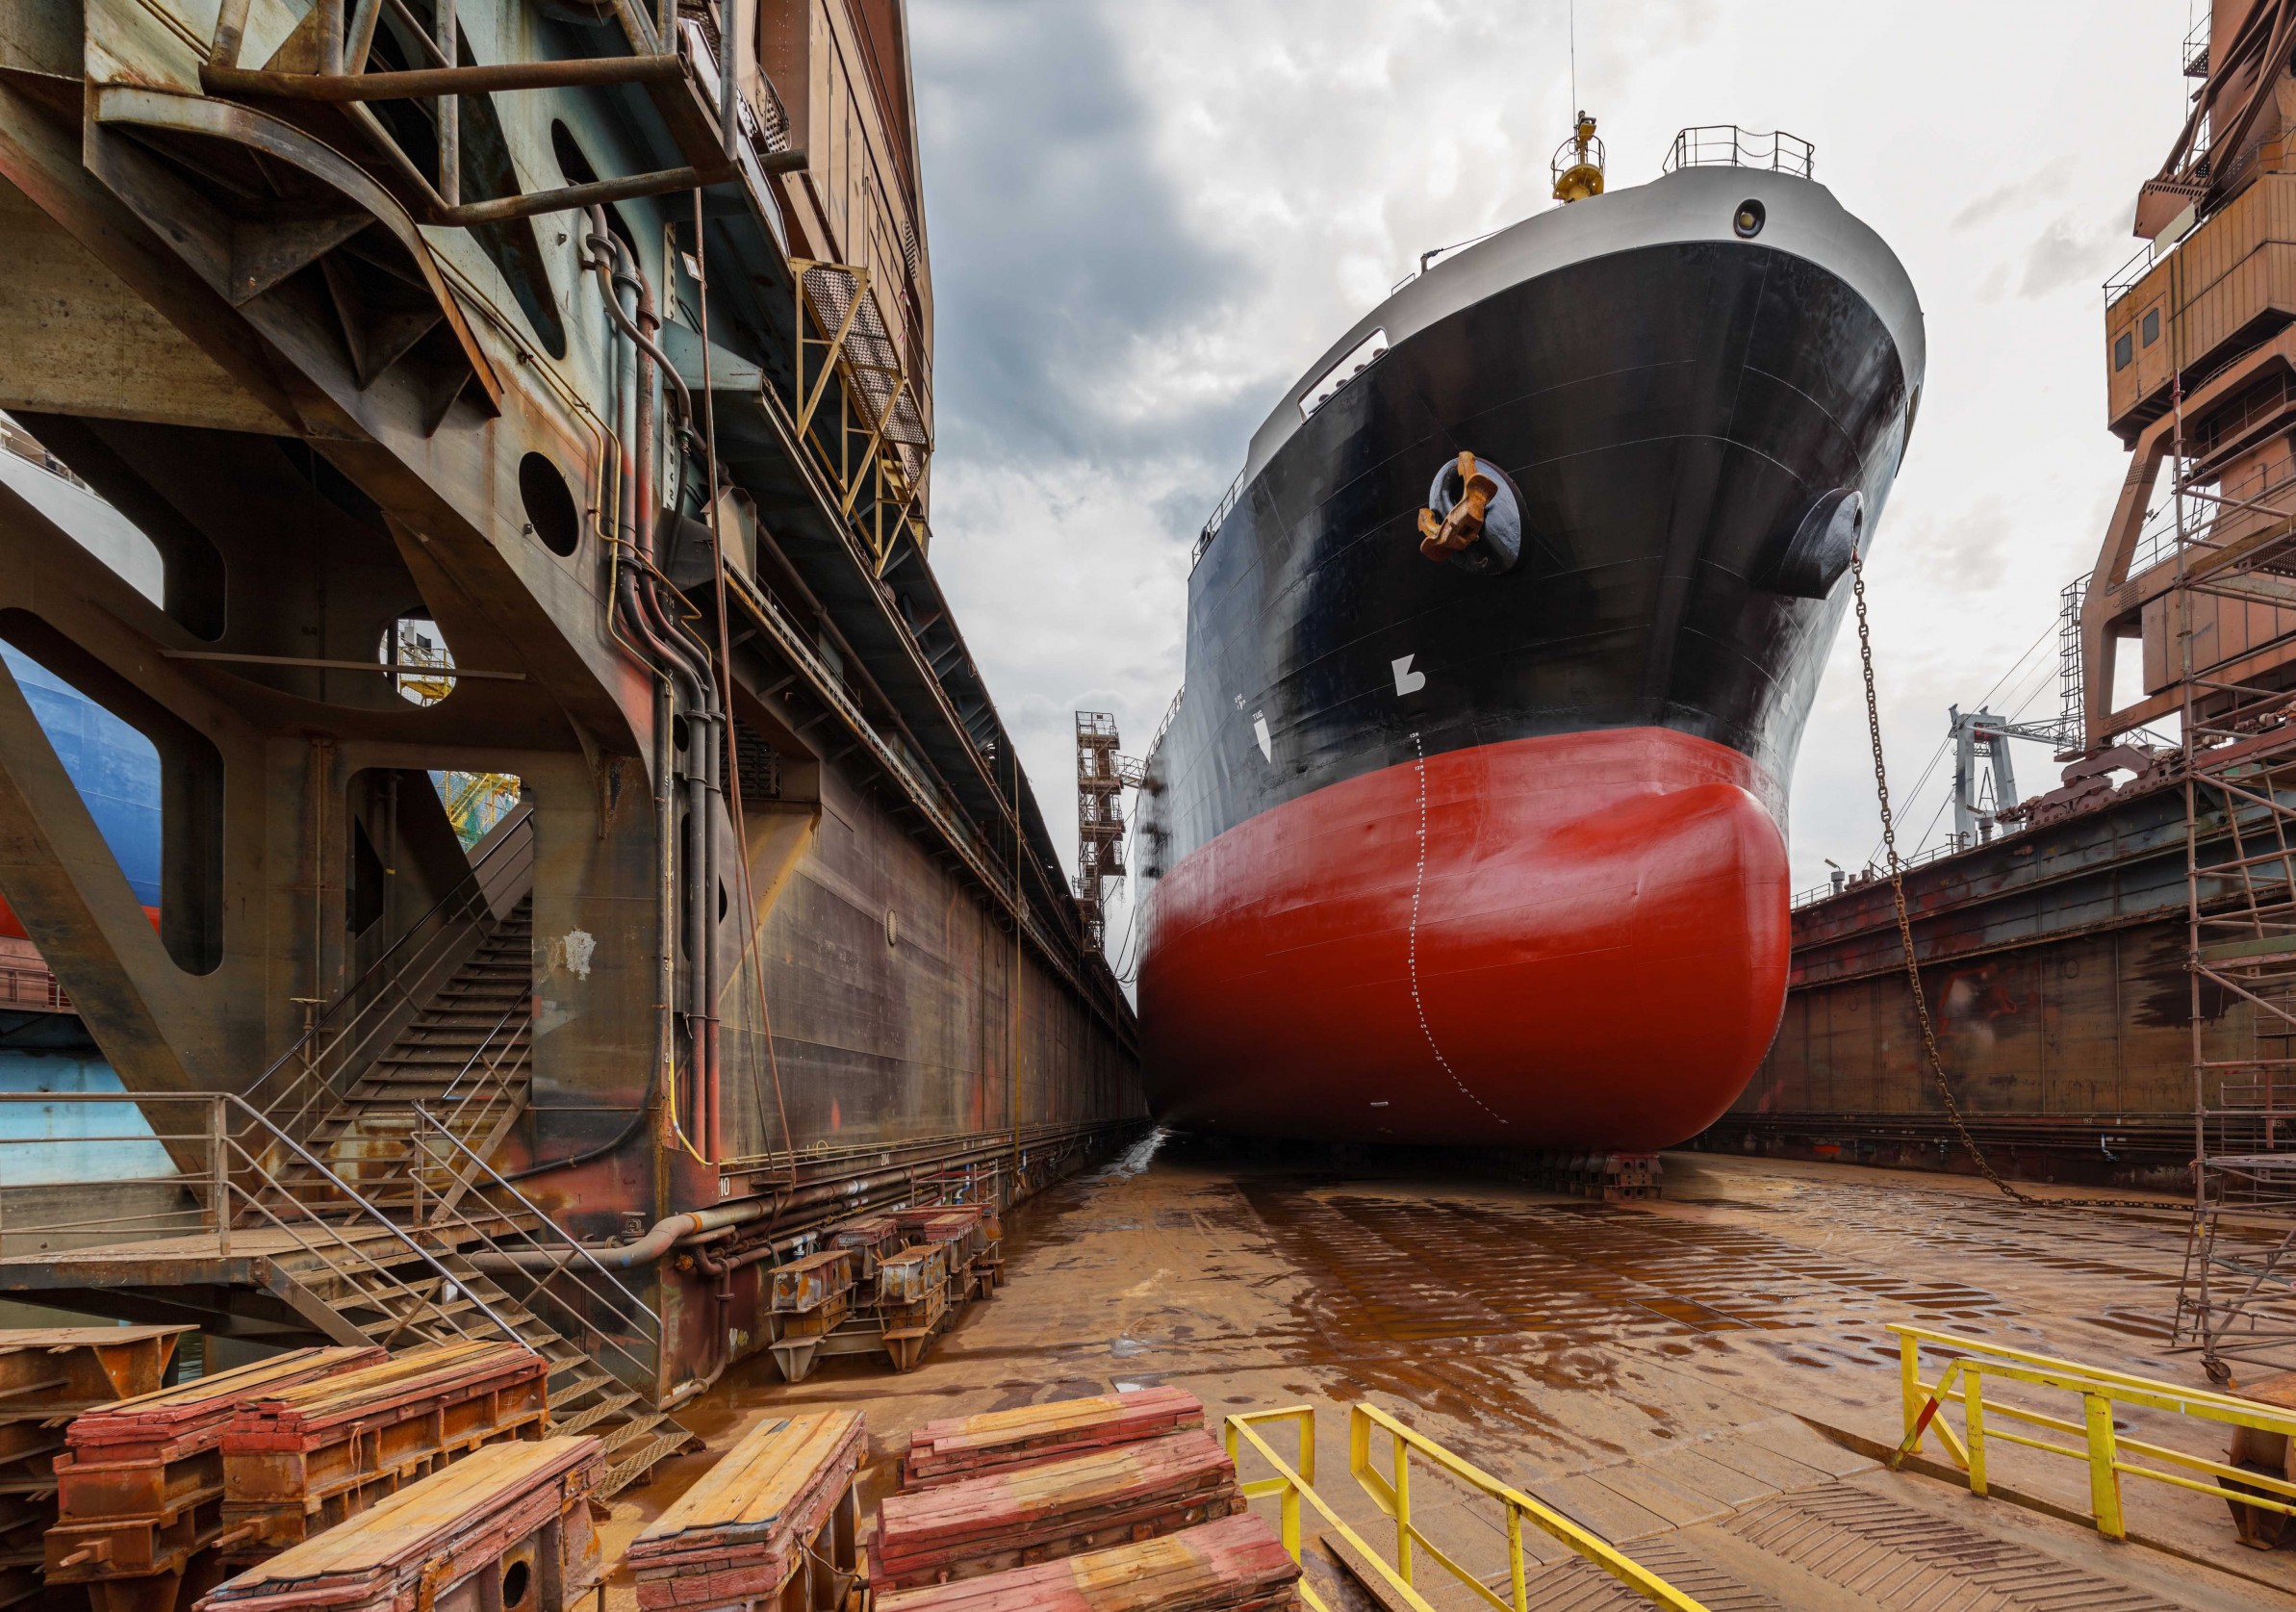 A large tanker ship is being renovated in shipyard